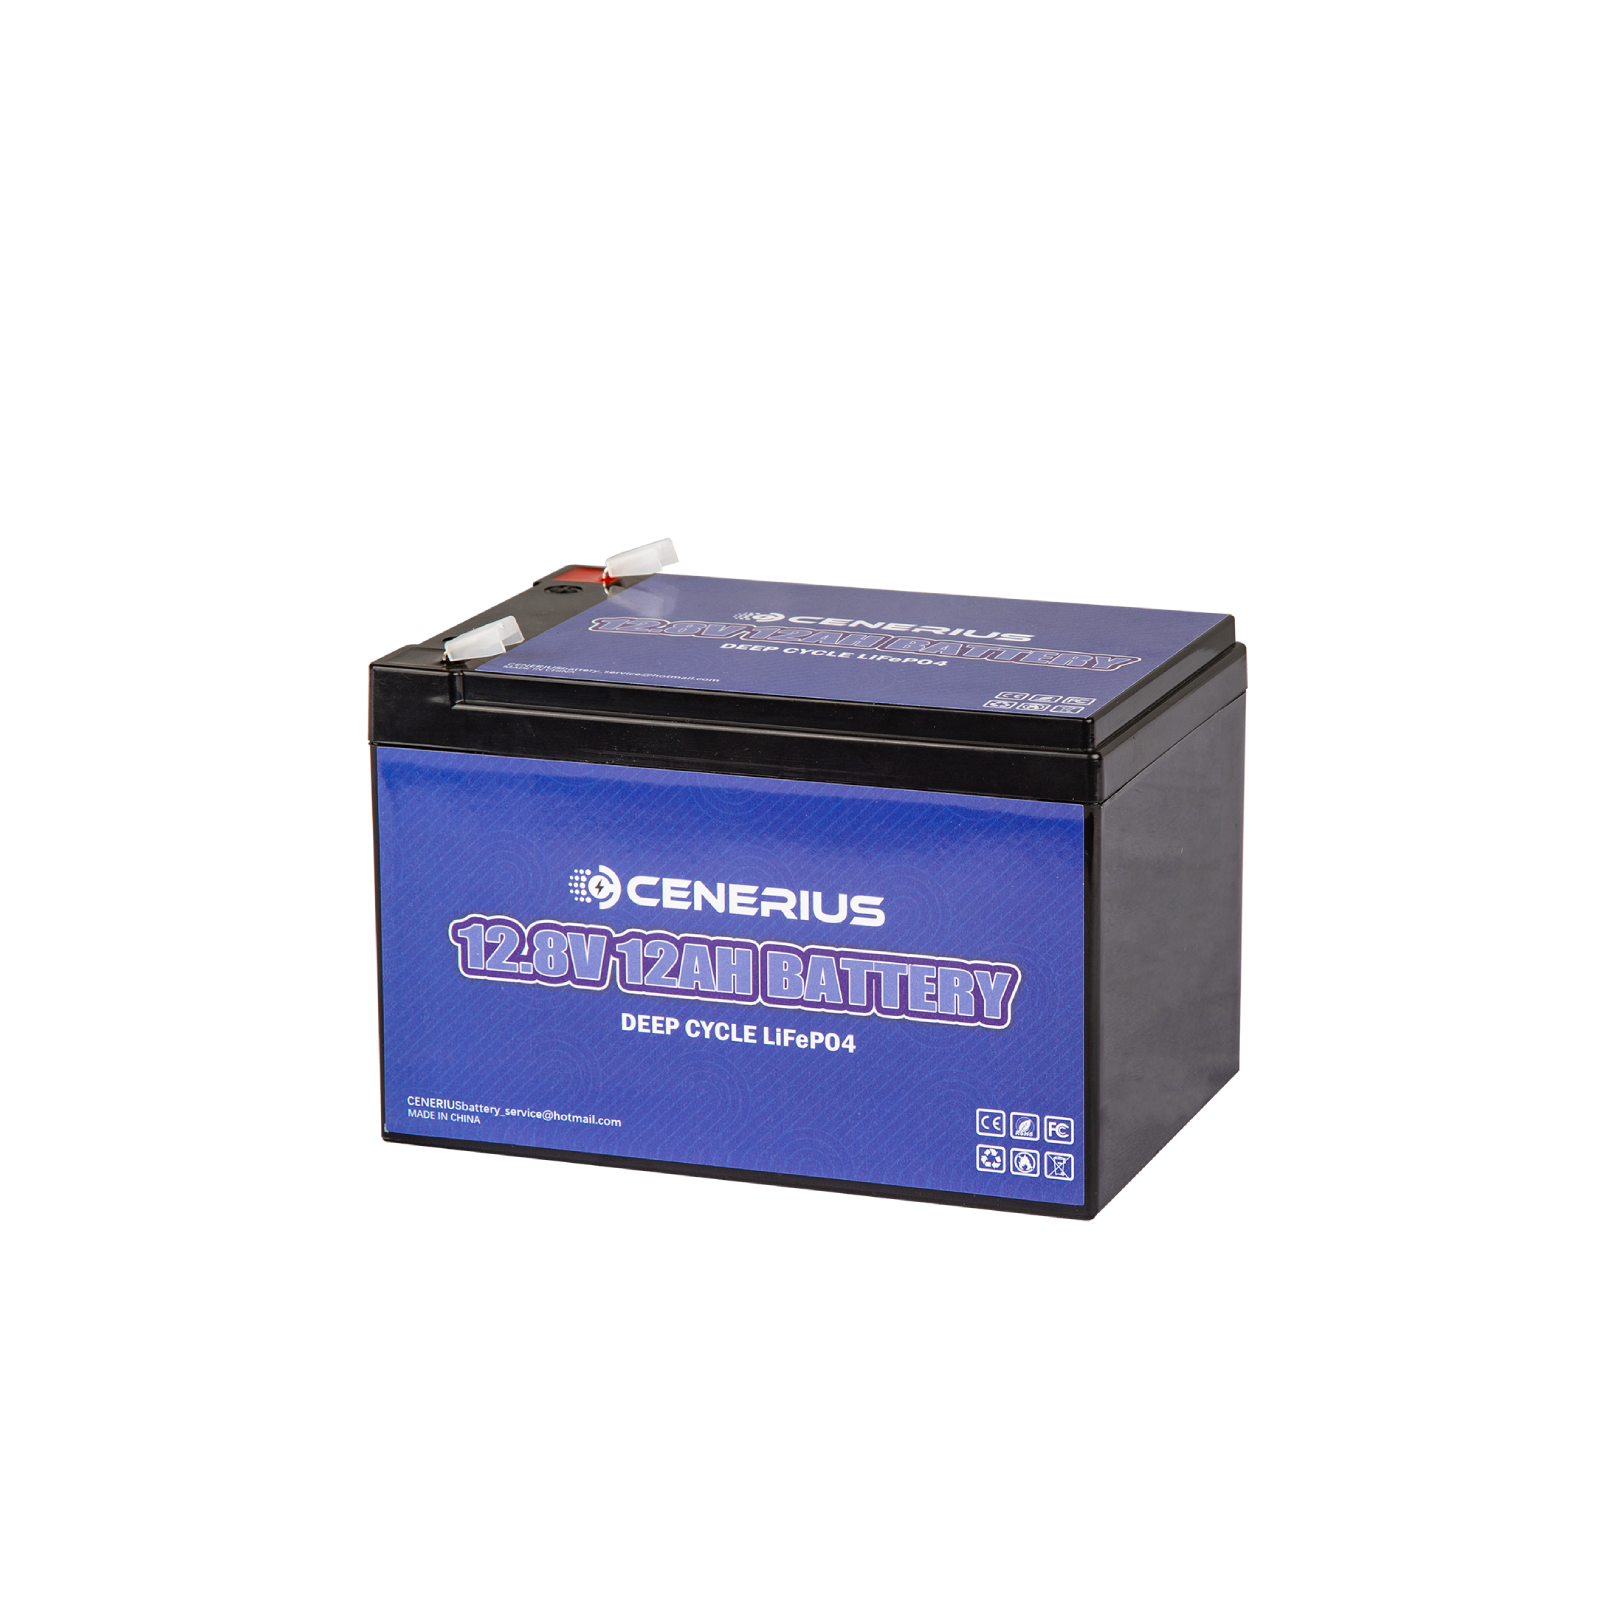 Cenerius 12V 12Ah LiFePO4 Lithium Battery, Built in 12A BMS, 153.6Wh  Energy,Perfect for Solar System, UPS, Lighting, Scooters, Fish Finders,  Power